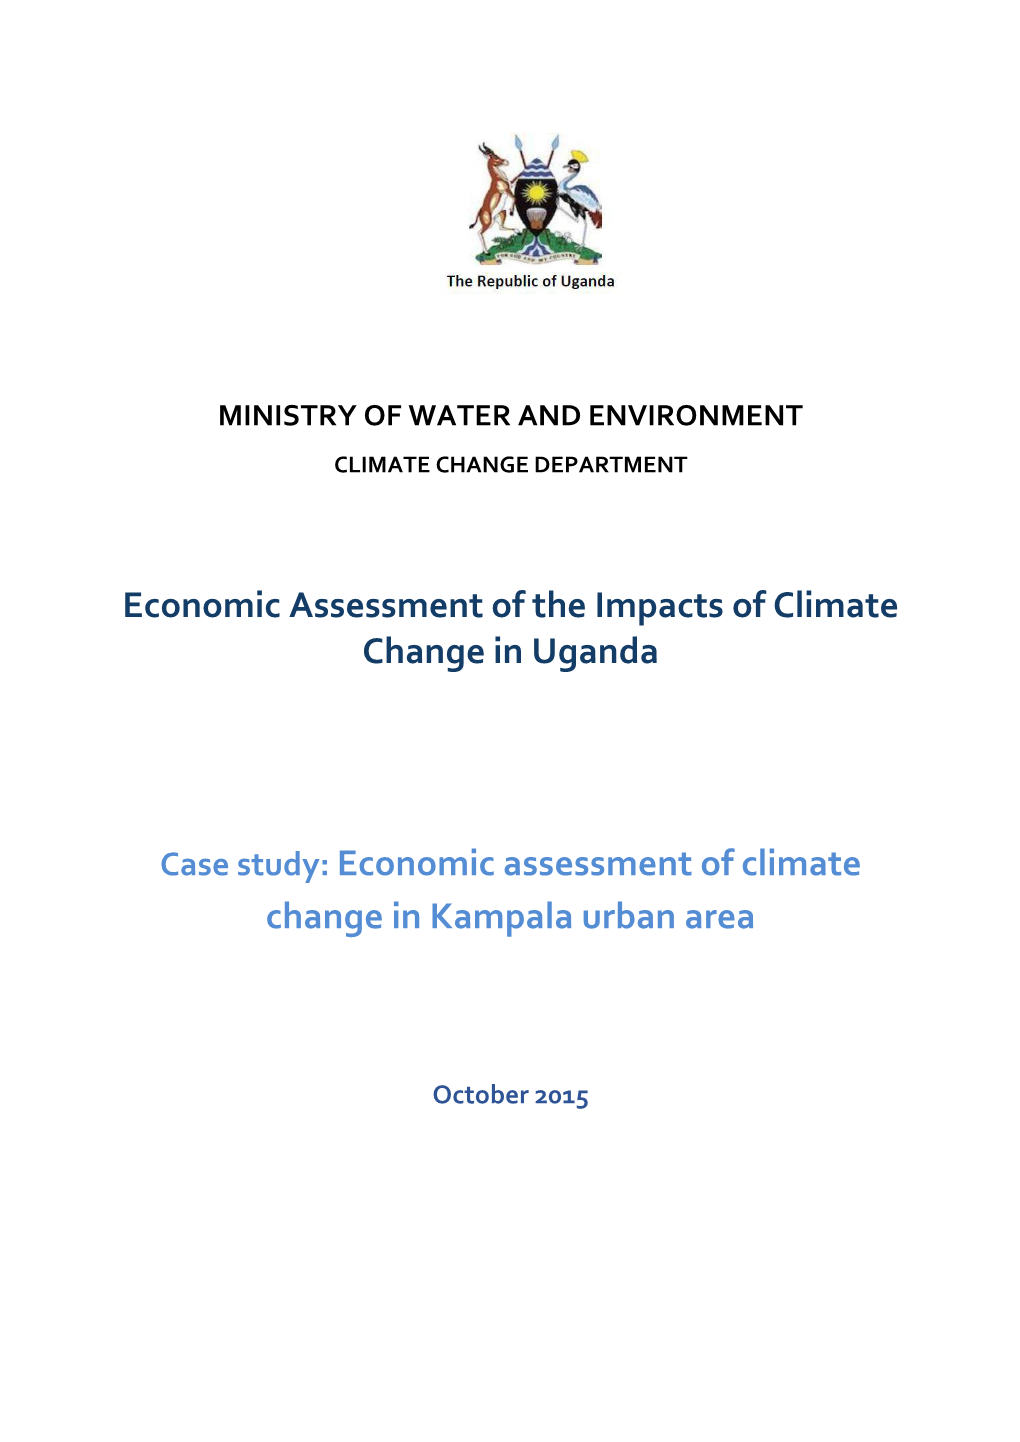 Economic Assessment of the Impacts of Climate Change in Uganda Case Study: Economic Assessment of Climate Change in Kampala Urba